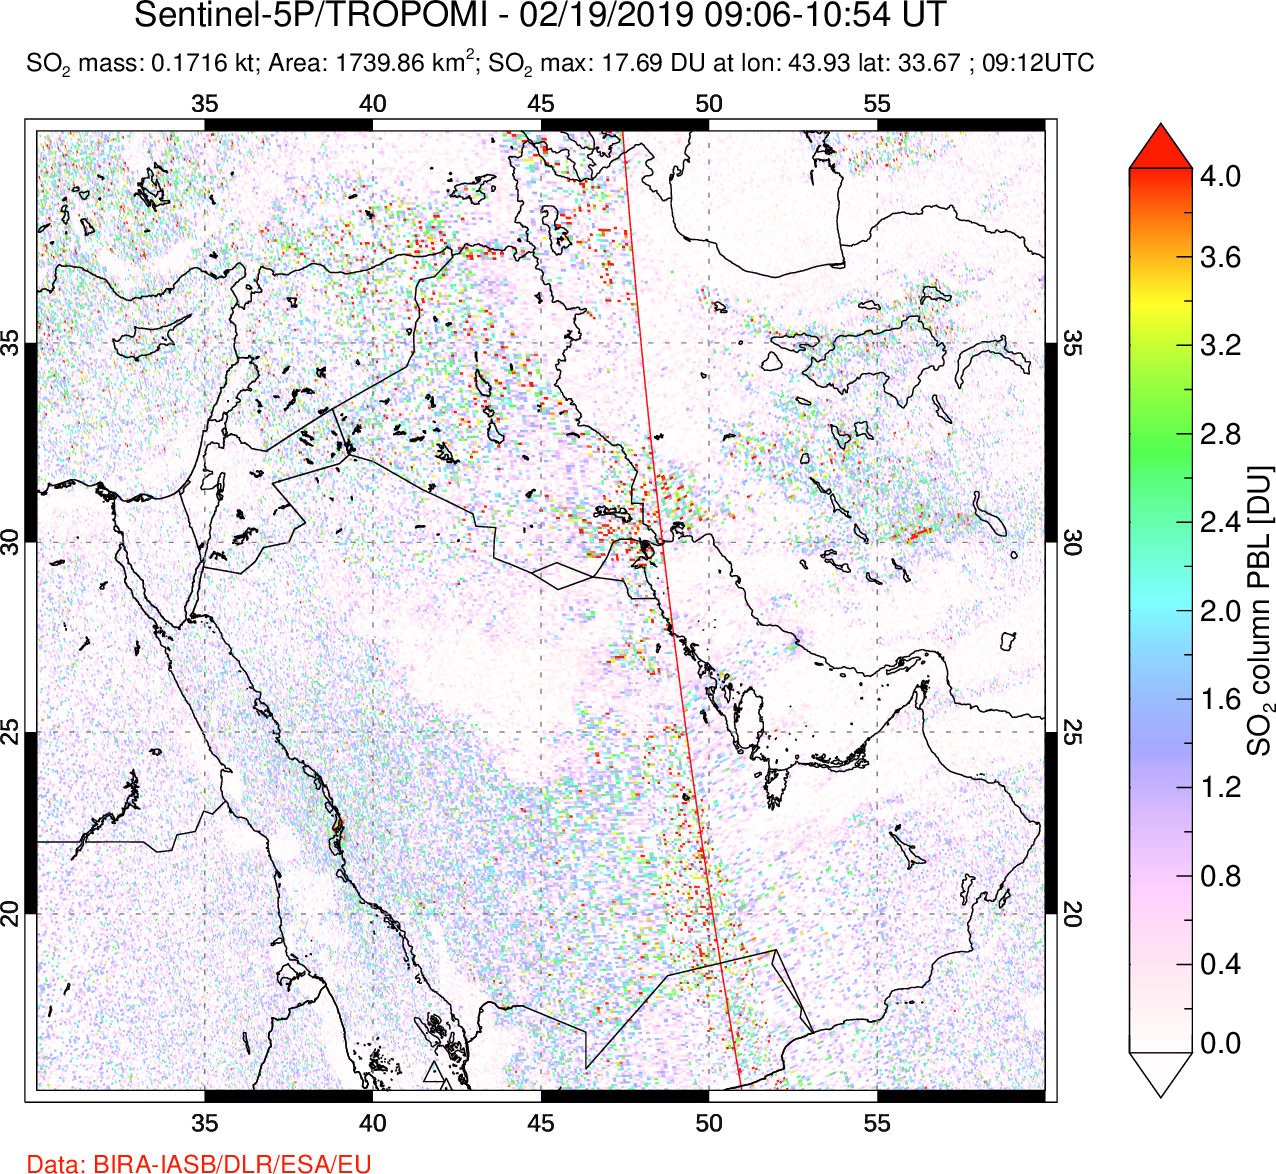 A sulfur dioxide image over Middle East on Feb 19, 2019.